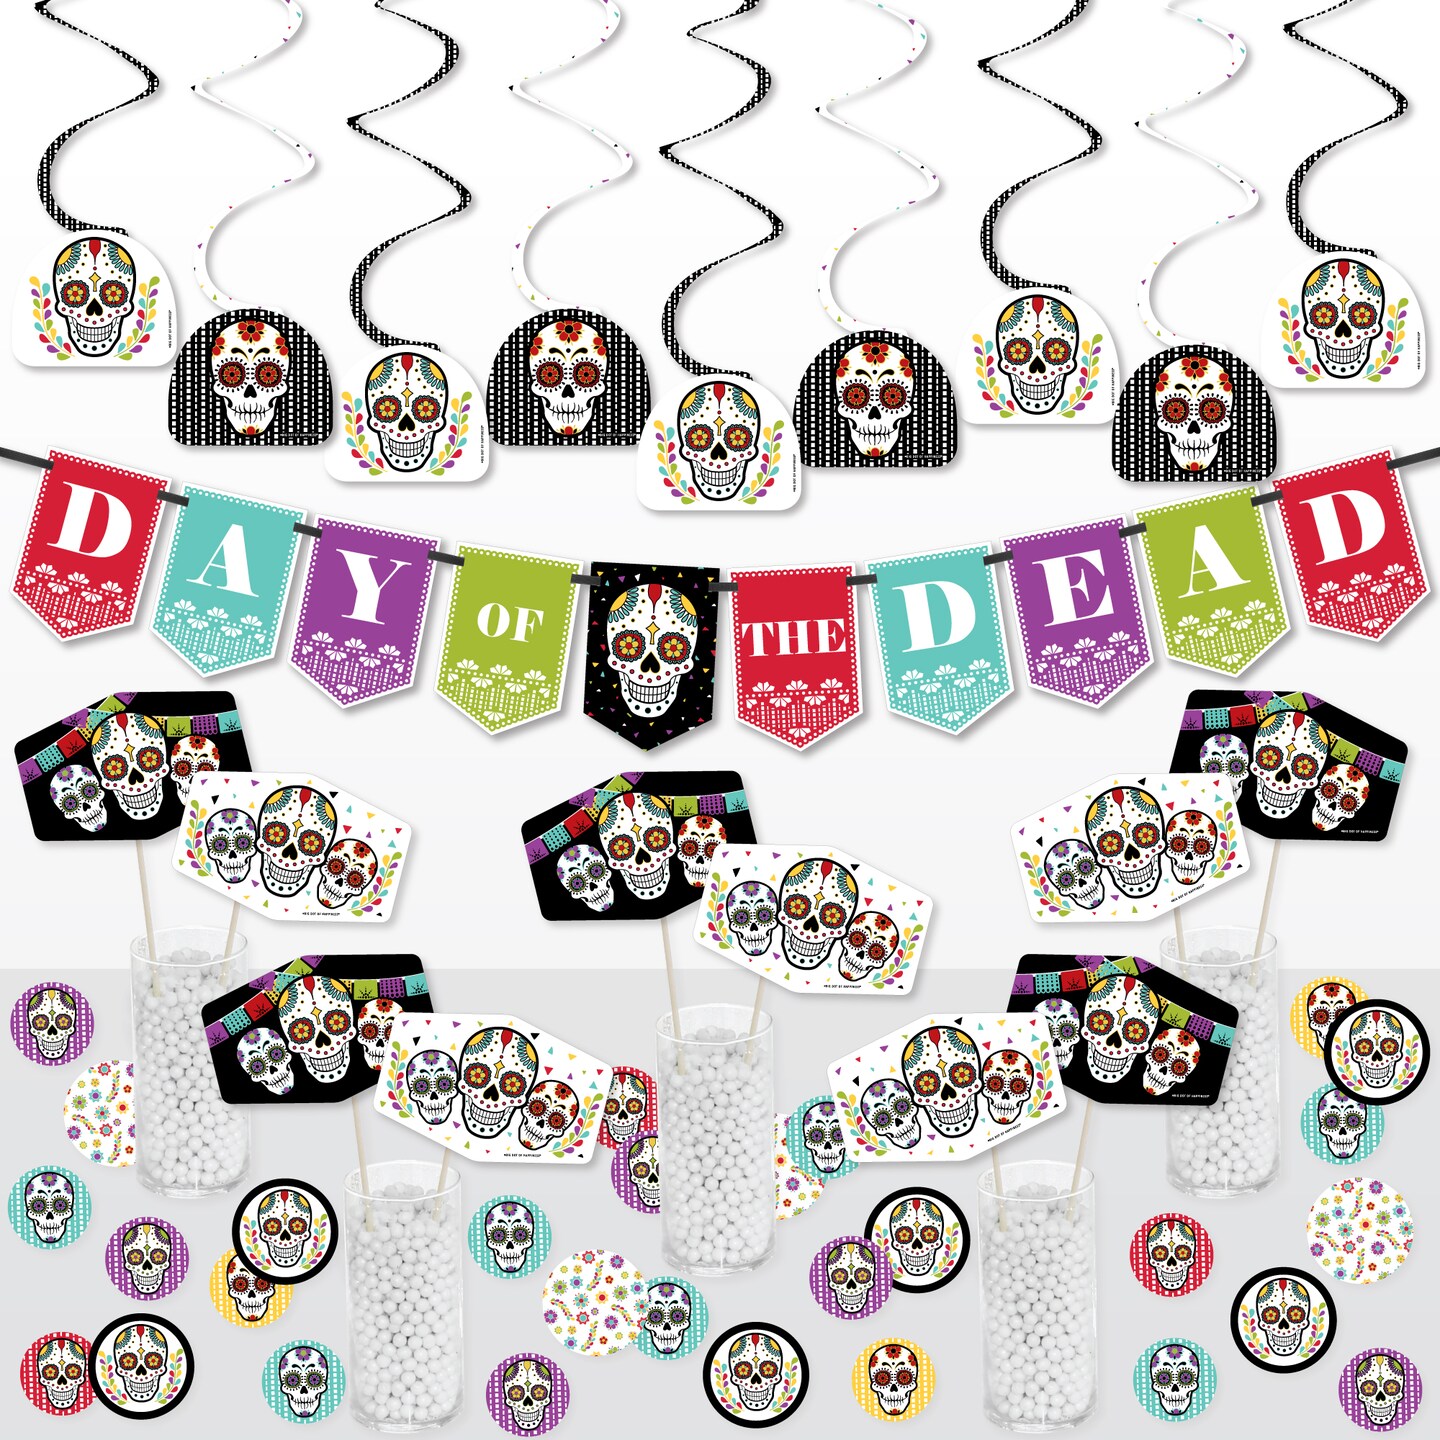 Big Dot of Happiness Day of the Dead - Halloween Sugar Skull Party Supplies Decoration Kit - Decor Galore Party Pack - 51 Pc